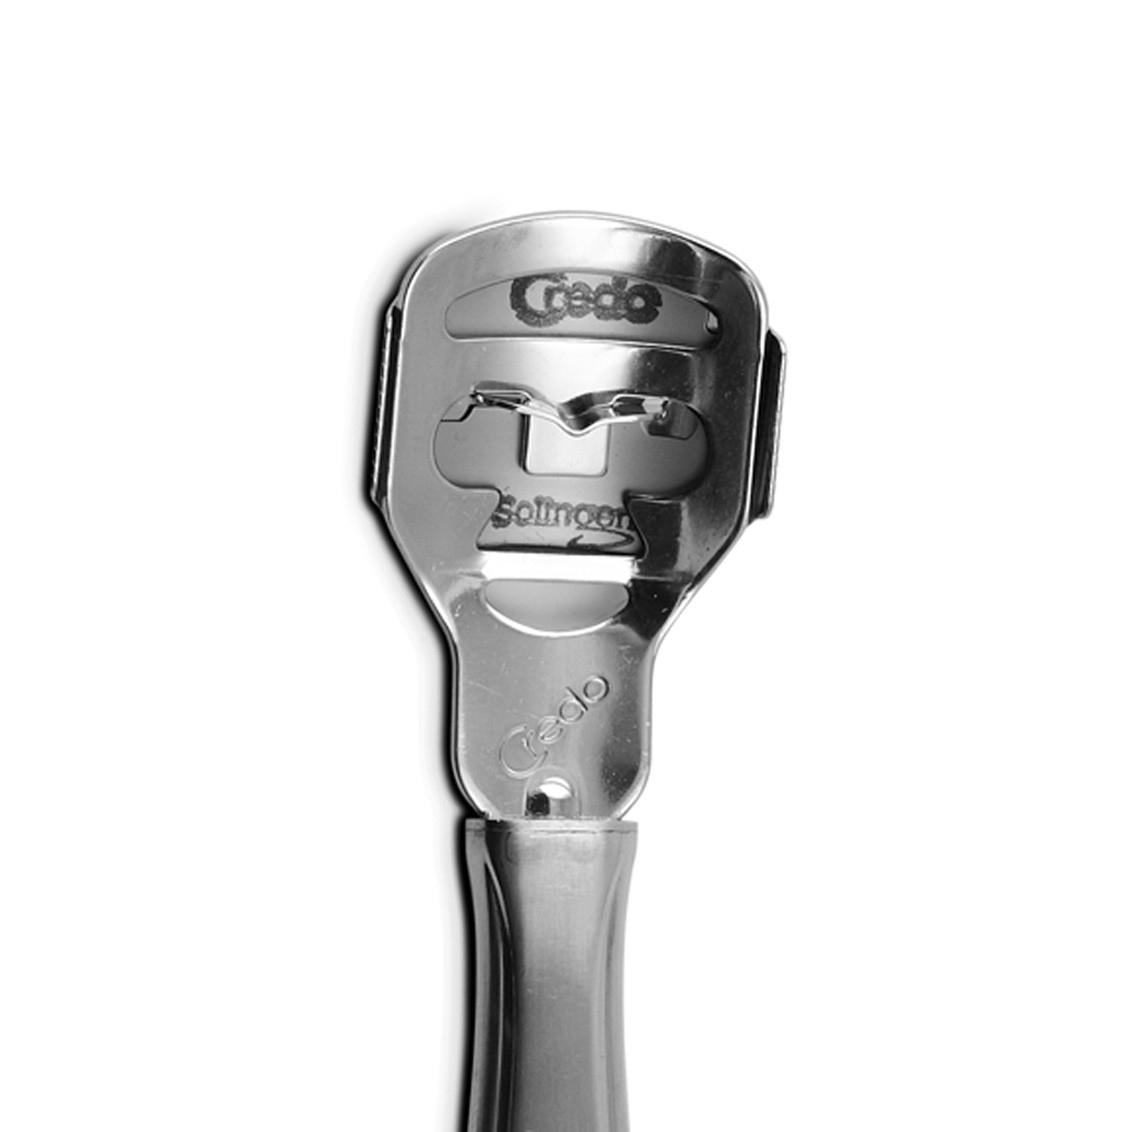 Credo stainless steel handle with vertical cut